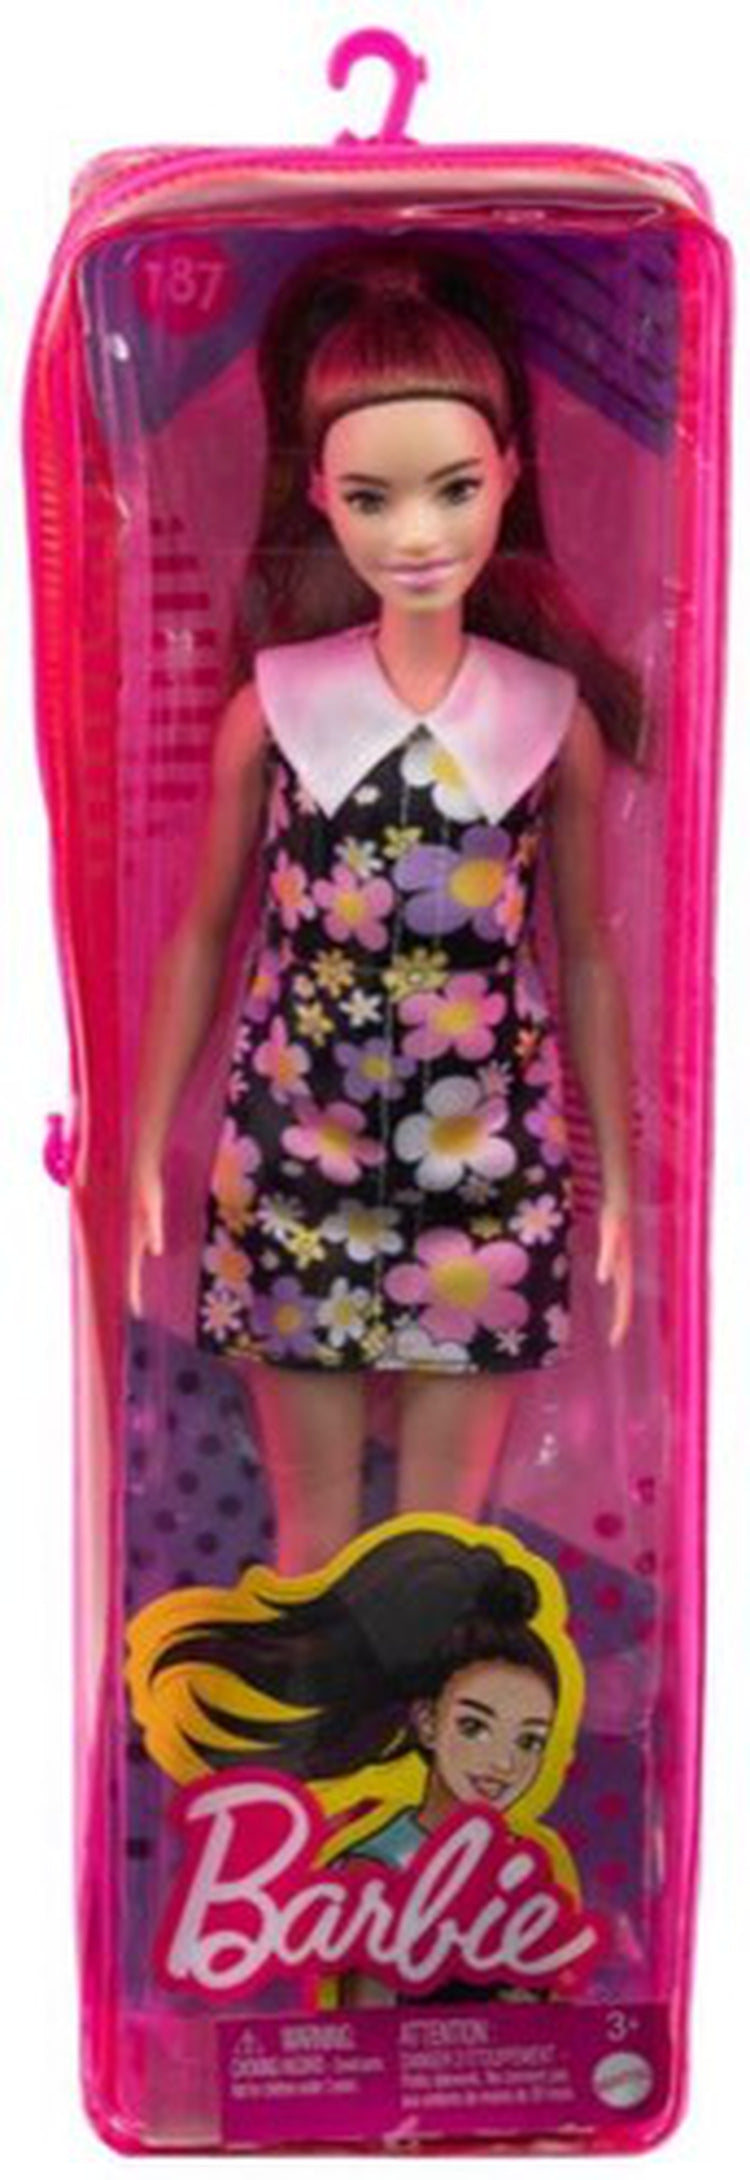 Mattel - Barbie Fashionista Doll, Daisy Print Shift Dress with White Collar, Pink Boots, Long Brown Hair in Pony Tail and Hearing Aids